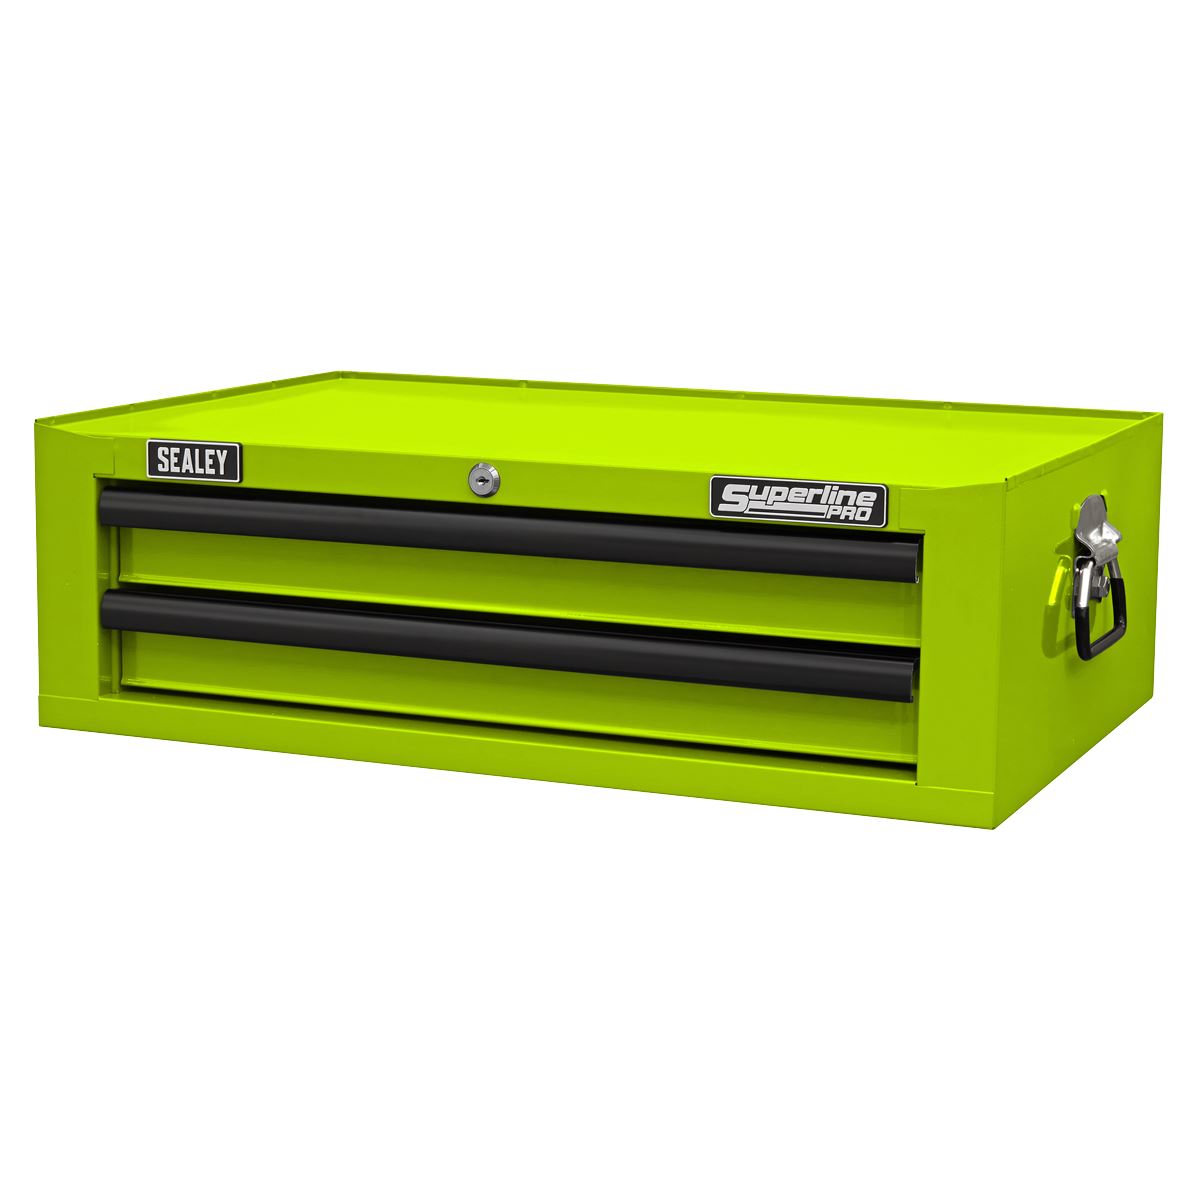 Sealey Superline Pro Mid-Box Tool Chest 2 Drawer with Ball-Bearing Slides - Green/Black